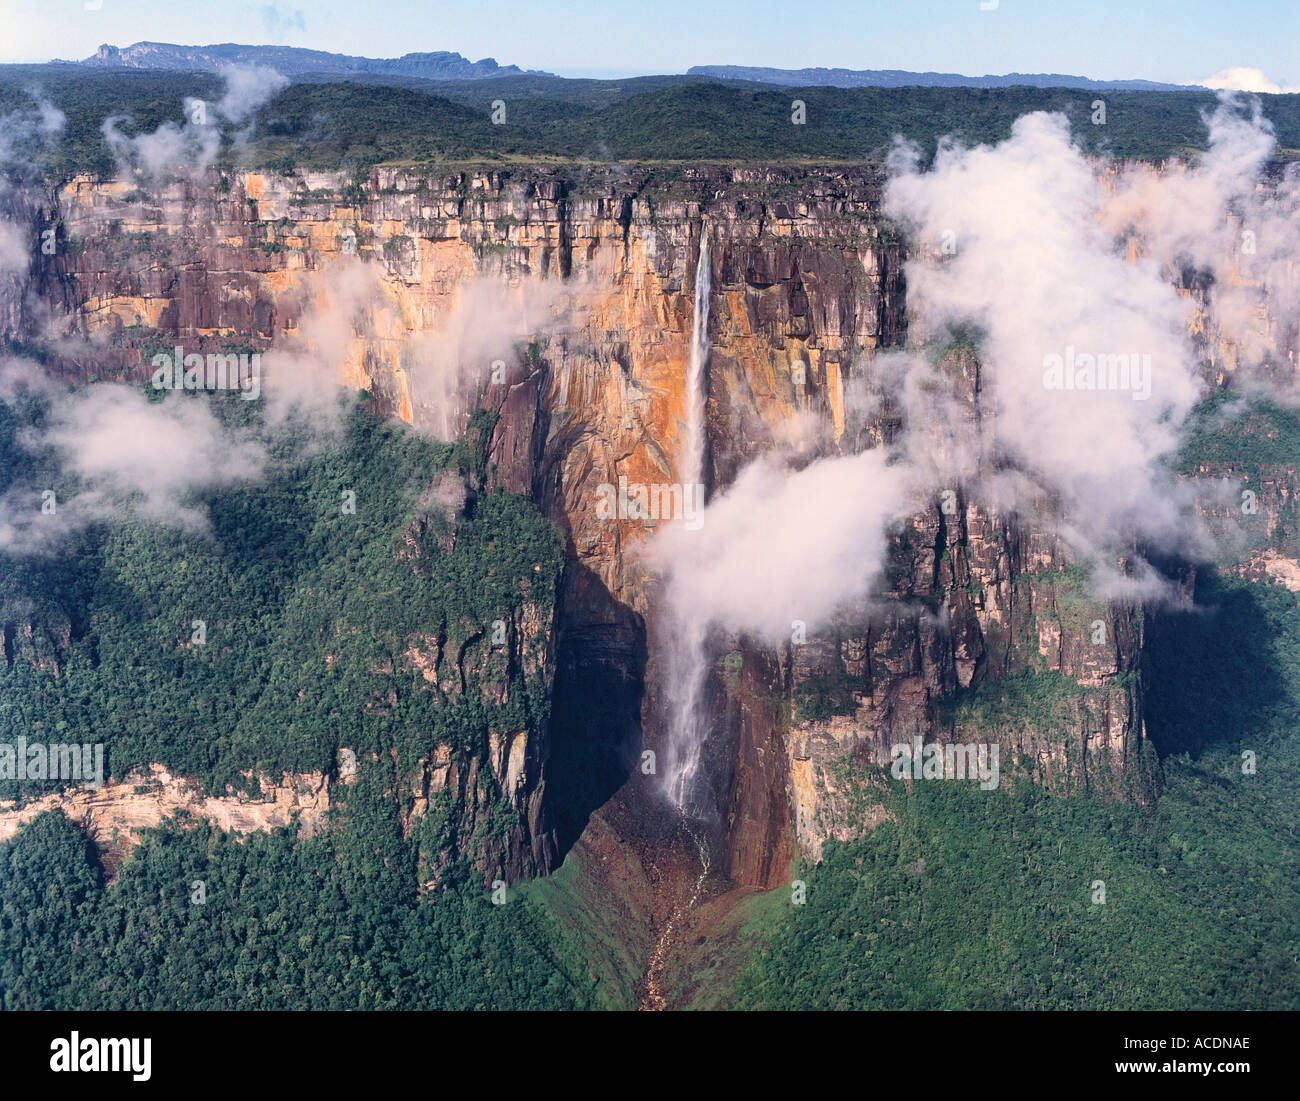 Canaima National Park Bolivar State Venezuela Angel Falls highest in world Aerial view Stock Photo